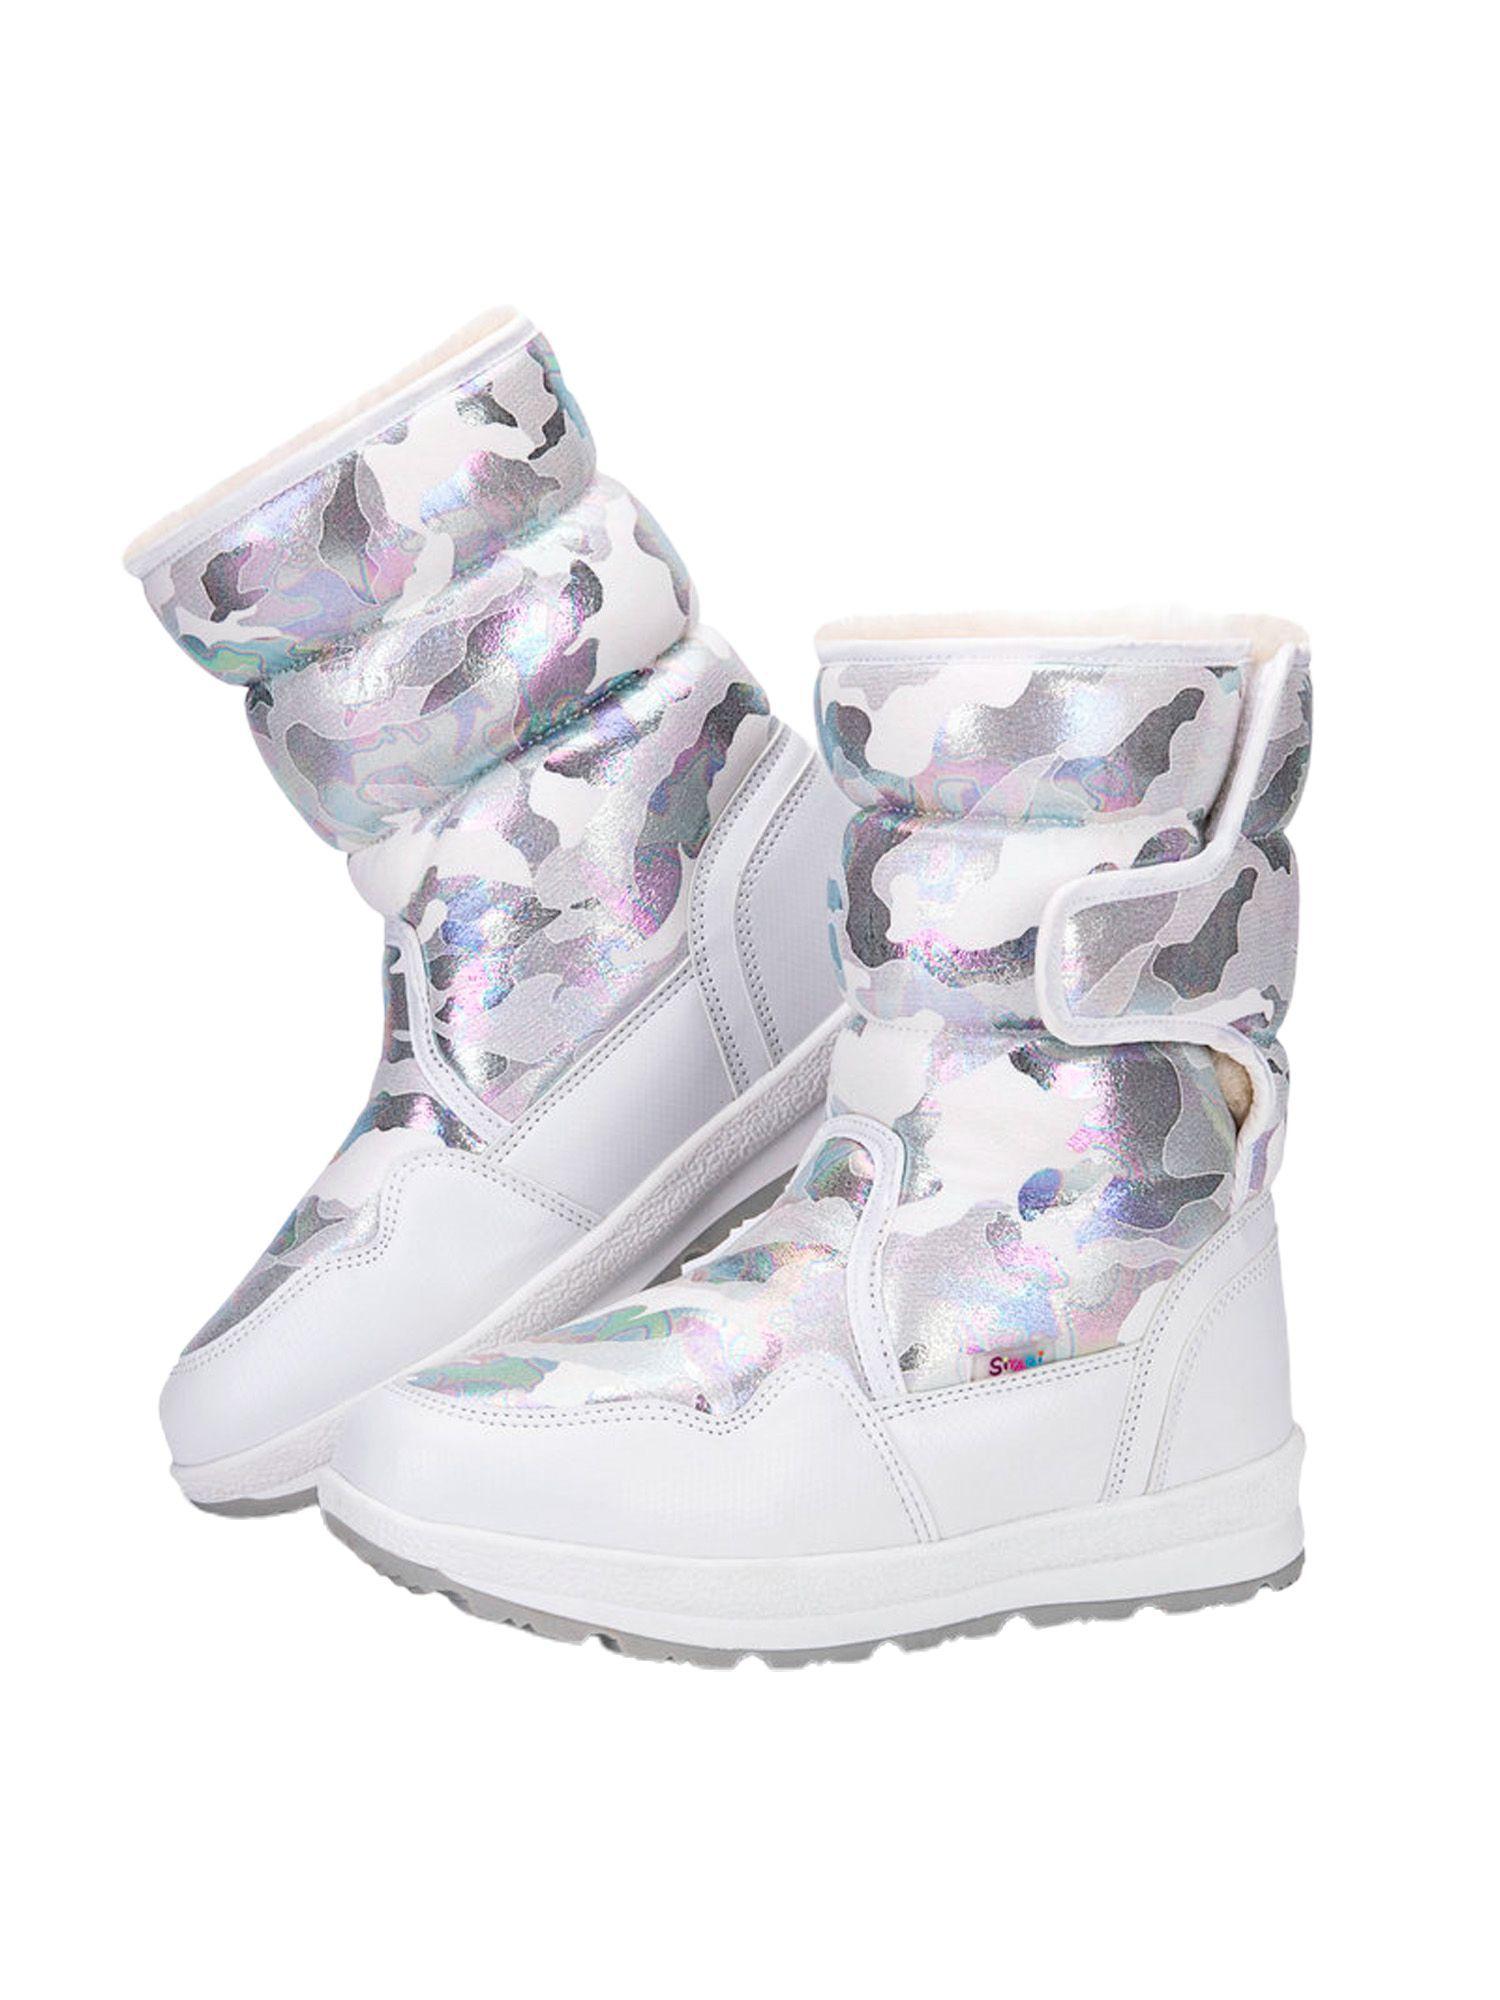 white and silver glam girls winter snow boots